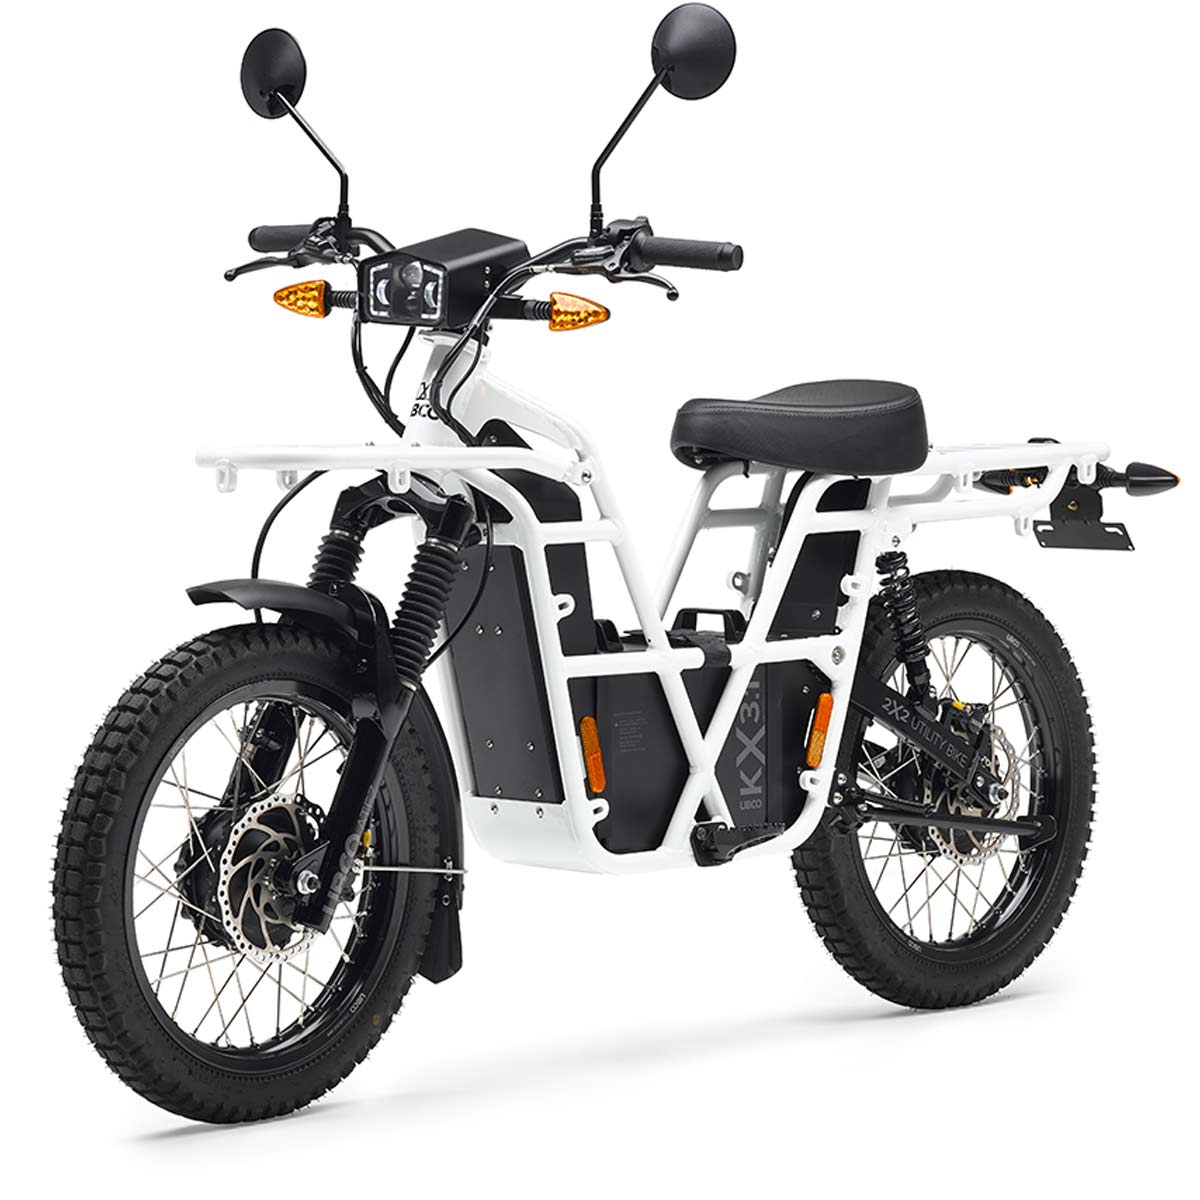 Products Ubco Adventure 2X2 electric motorcycle